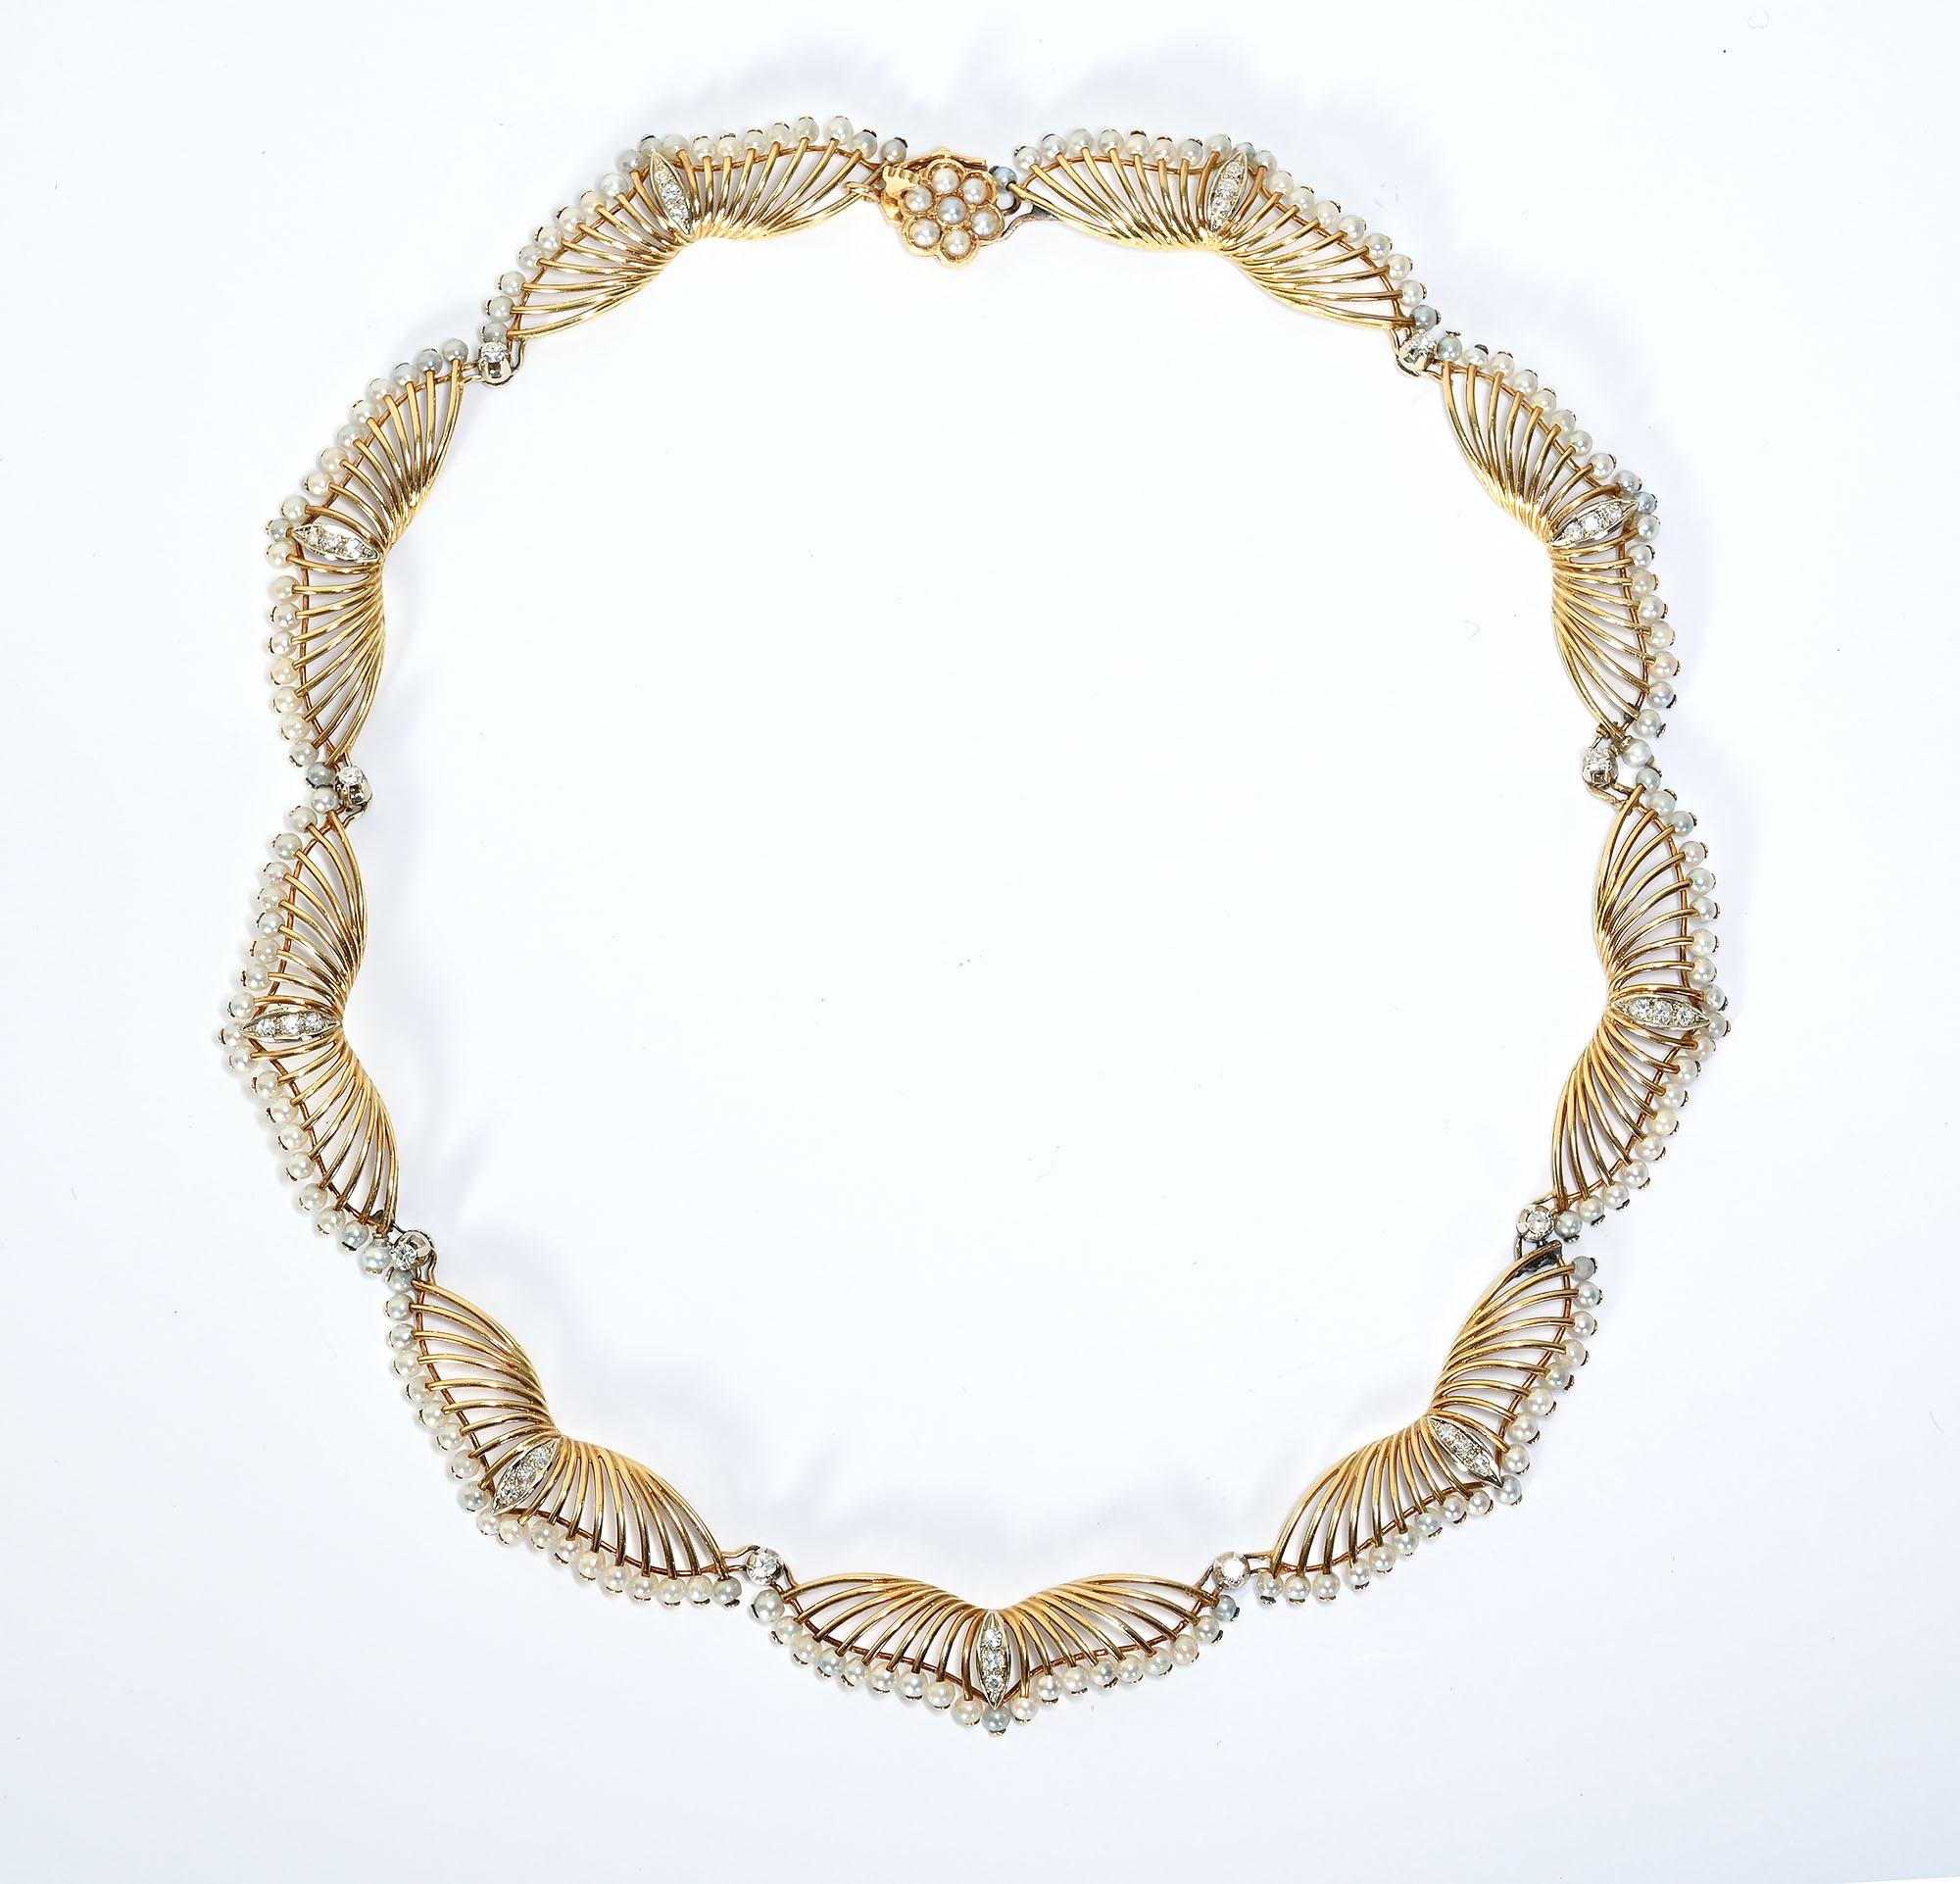 Delicate, graceful and elegant pearl and diamond gold choker necklace by the firm of Kwiat. Kwiat was established in New York in 1907 and is now run by the third generation of family members. 
This necklace is 16 inches in length. Each link has 19